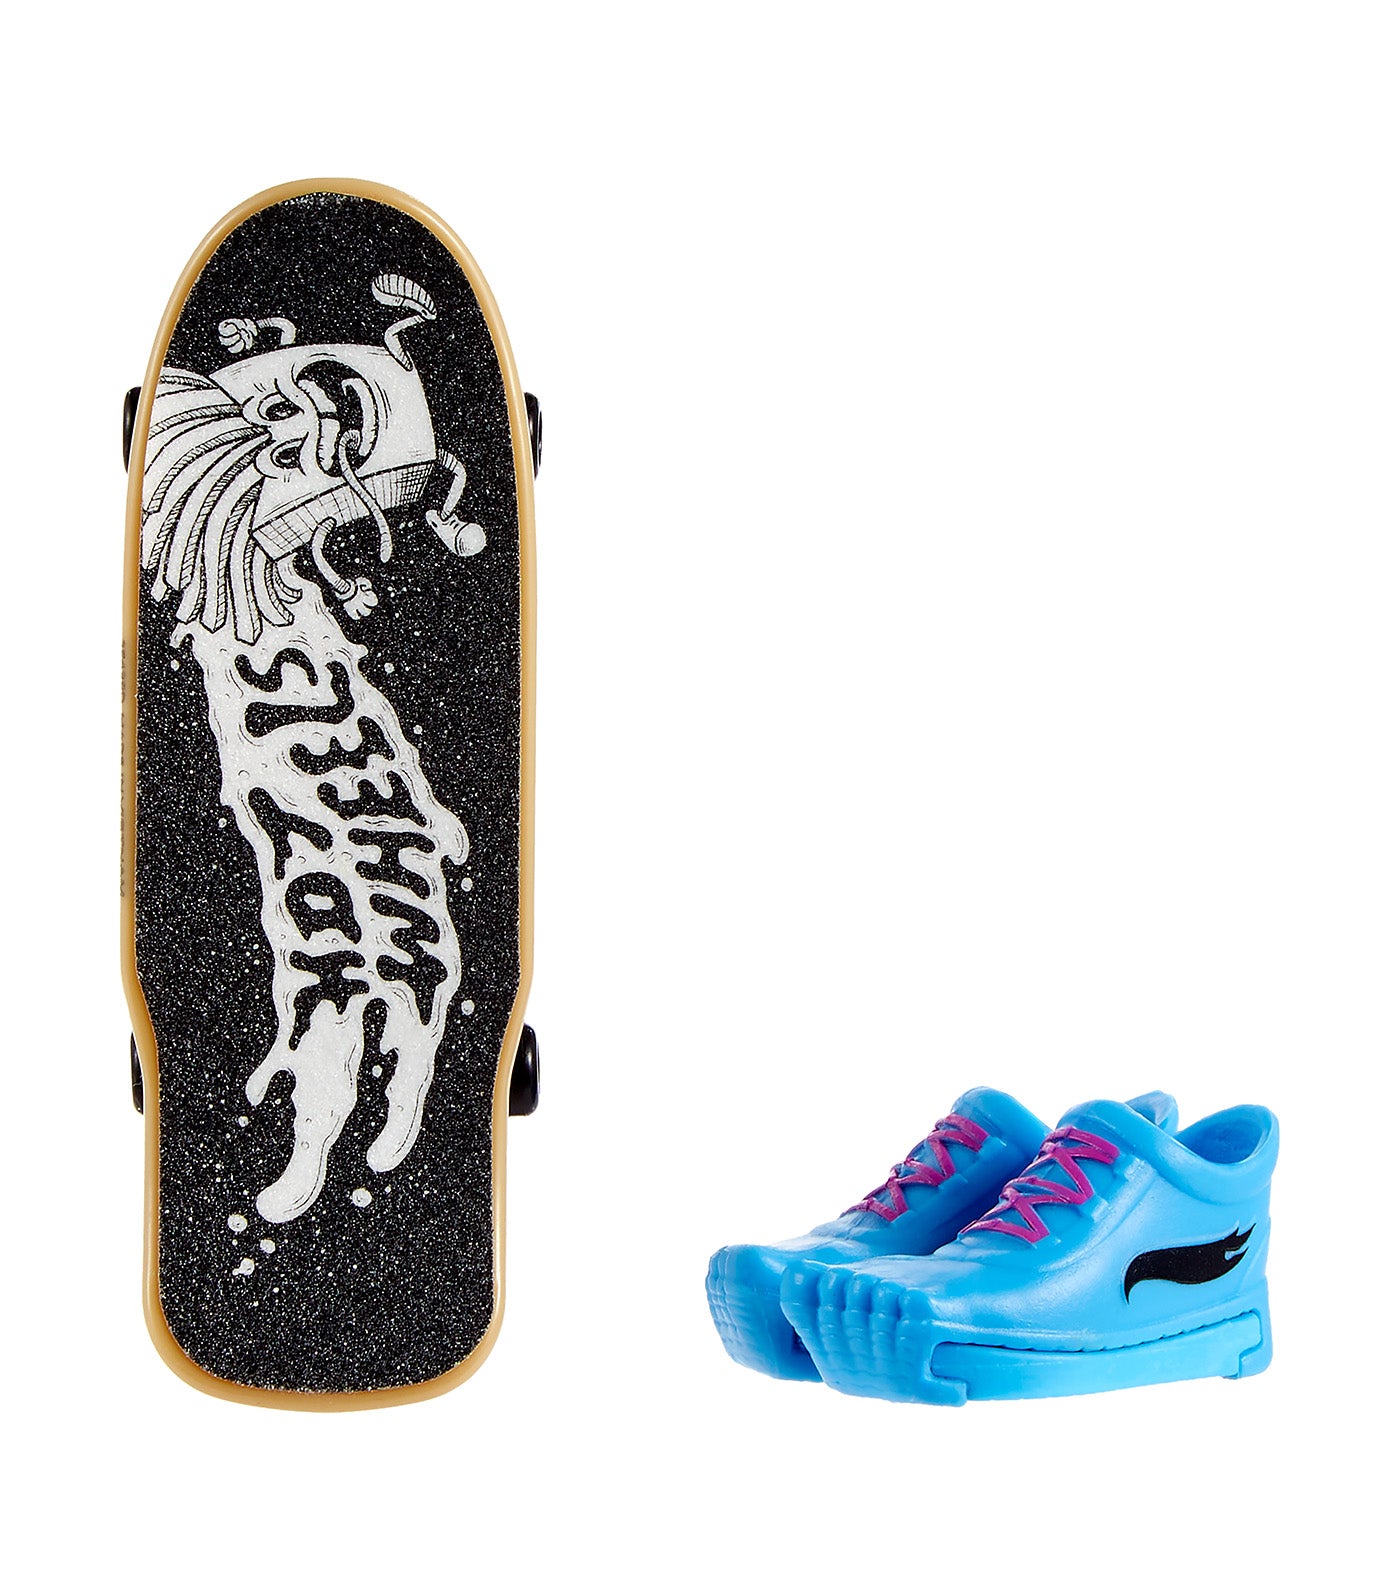 Skate - Fingerboard and New Shoe 3 (HNG19)